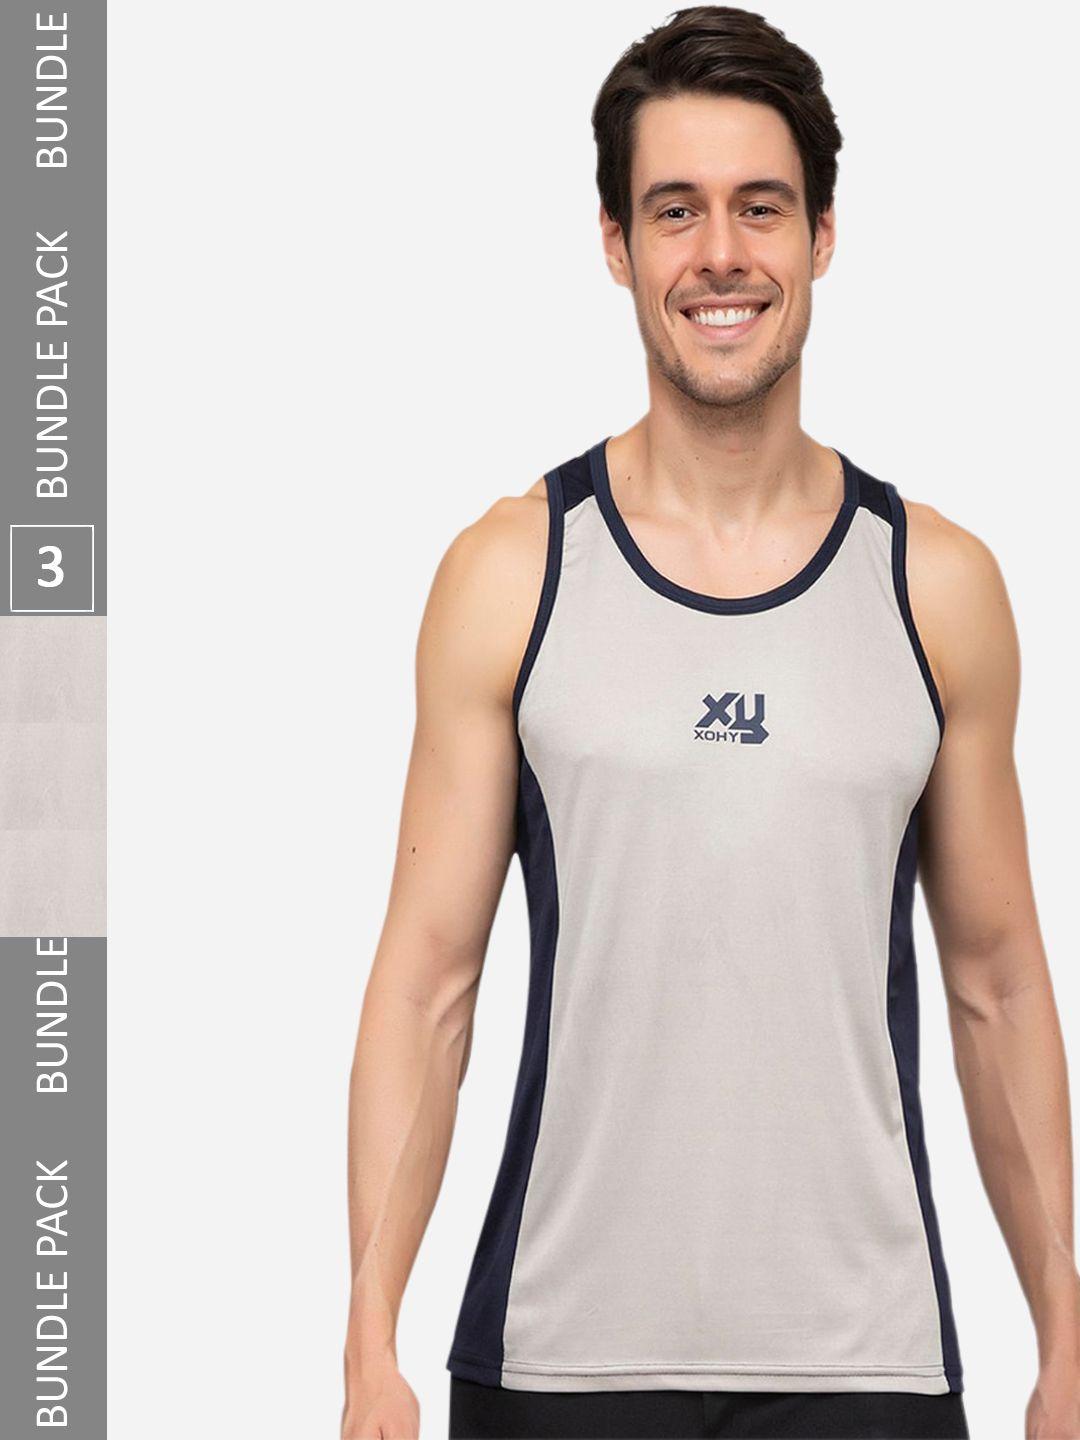 xohy pack of 3 gym vests